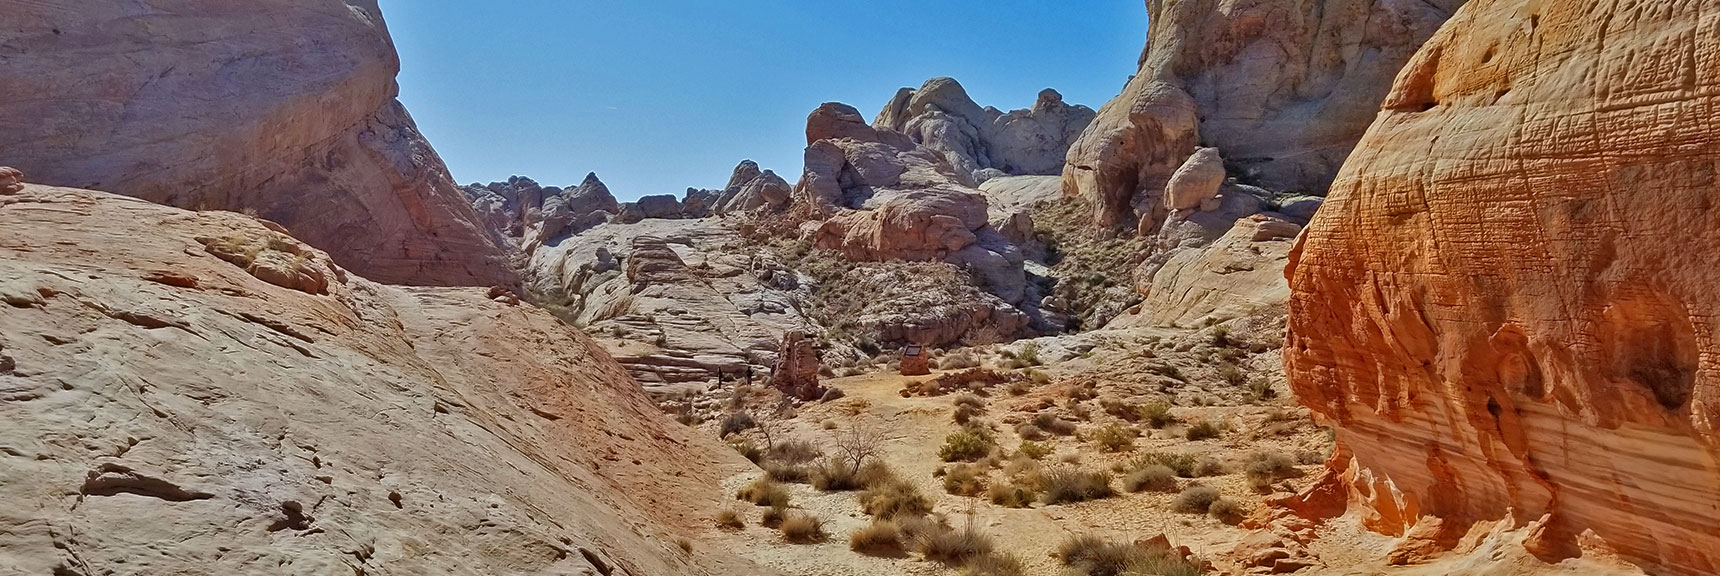 Descending Toward the Old Hollywood Movie Set in White Domes Loop Trail in Valley of Fire State Park, Nevada